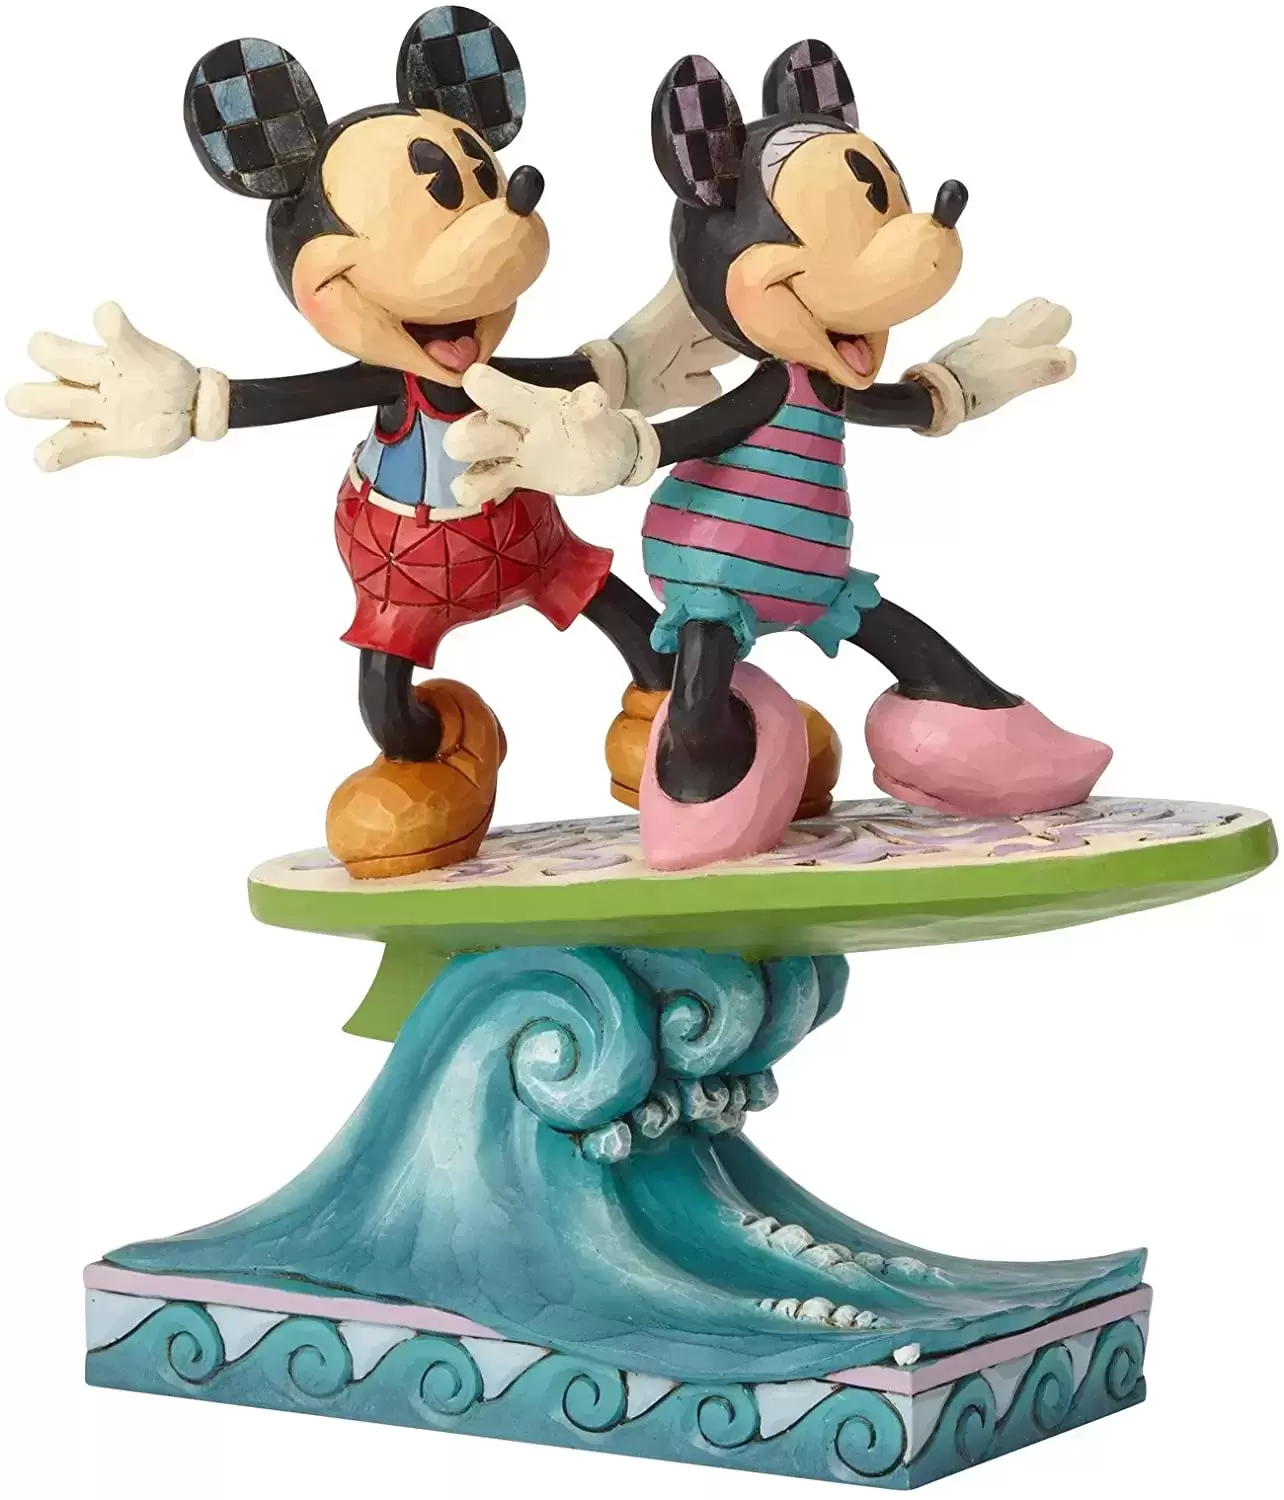 Disney Traditions by Jim Shore - Mickey & Minnie Surfing - Surf\'s up